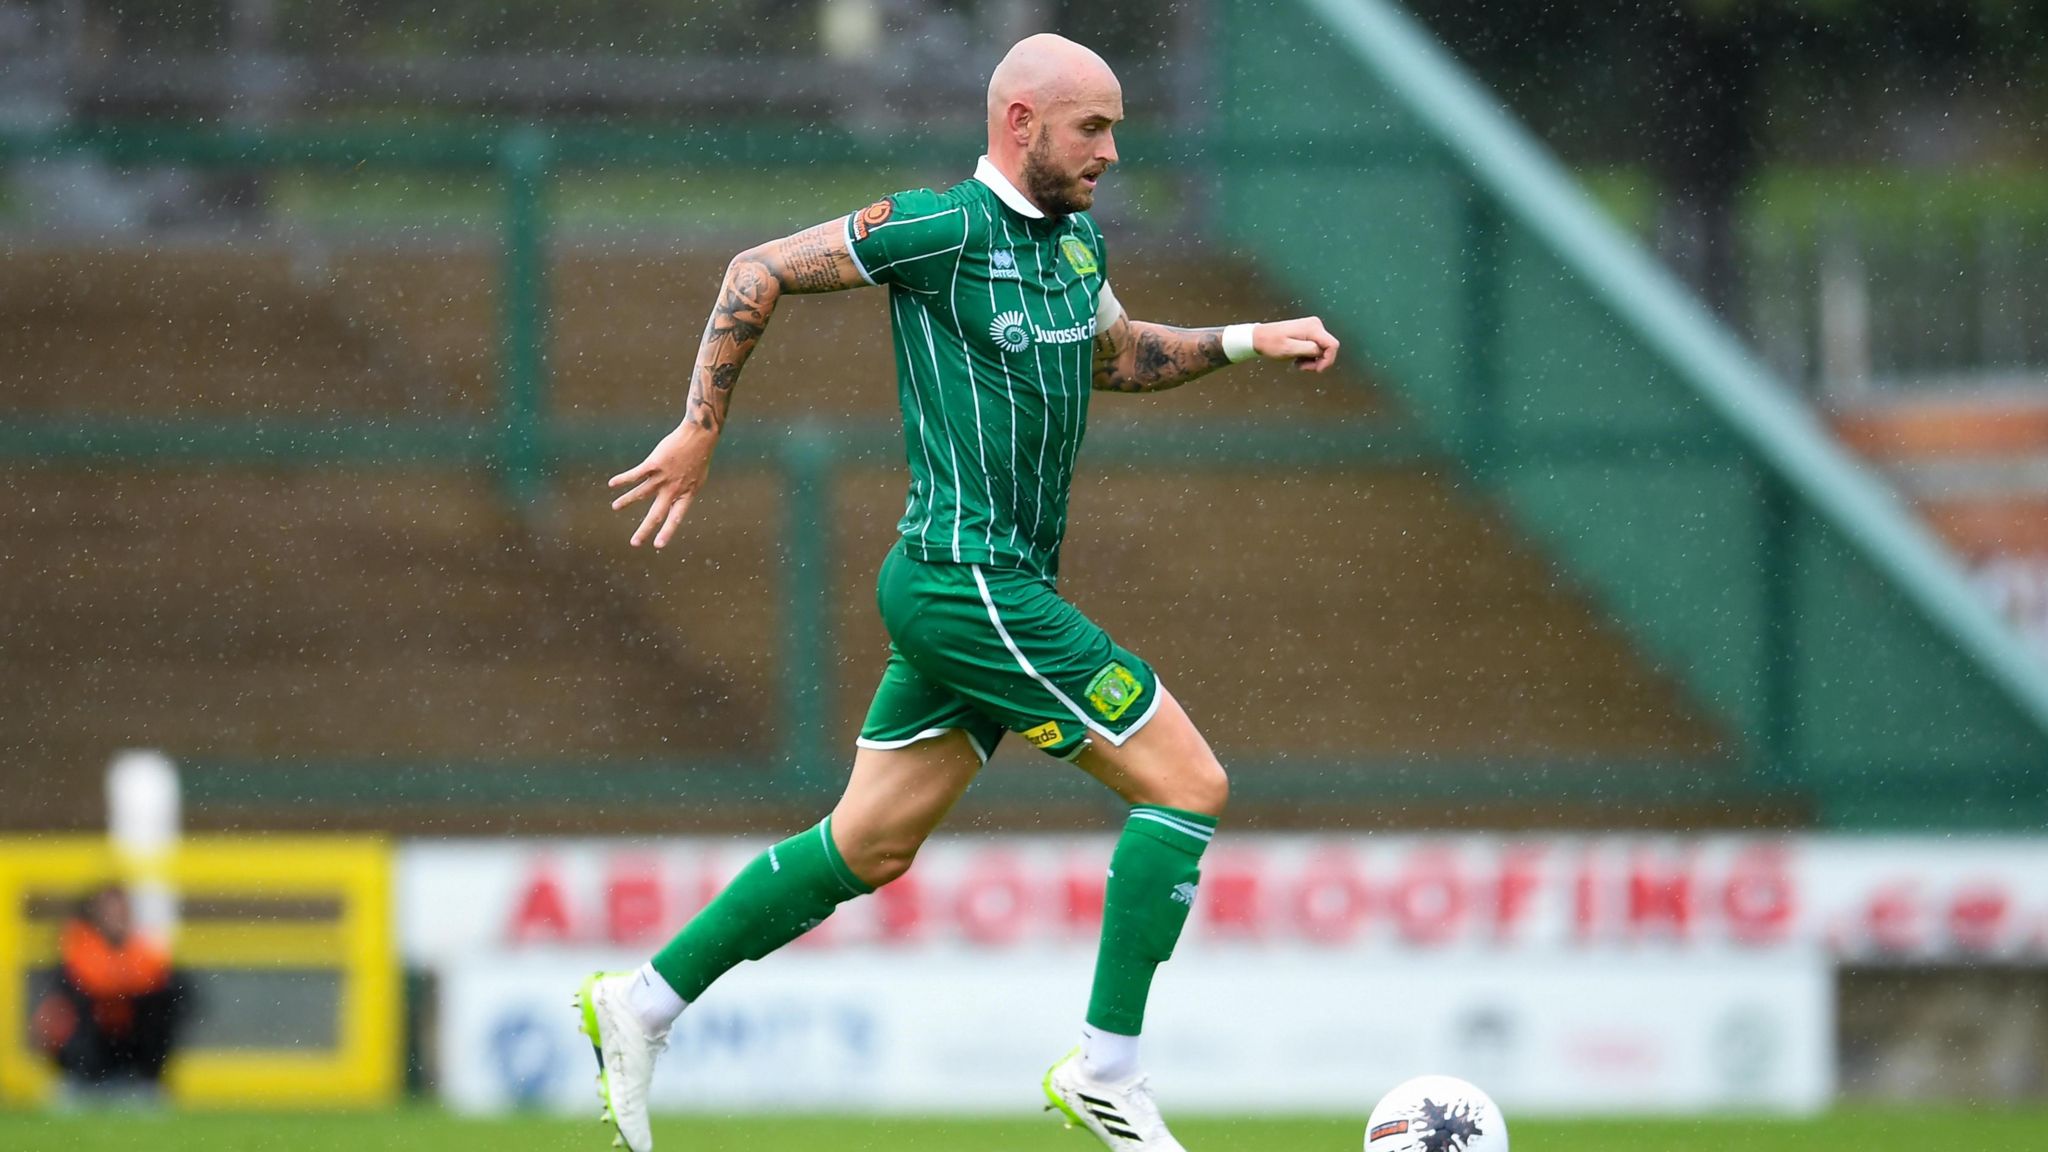 Josh Staunton running with the ball during a game for Yeovil